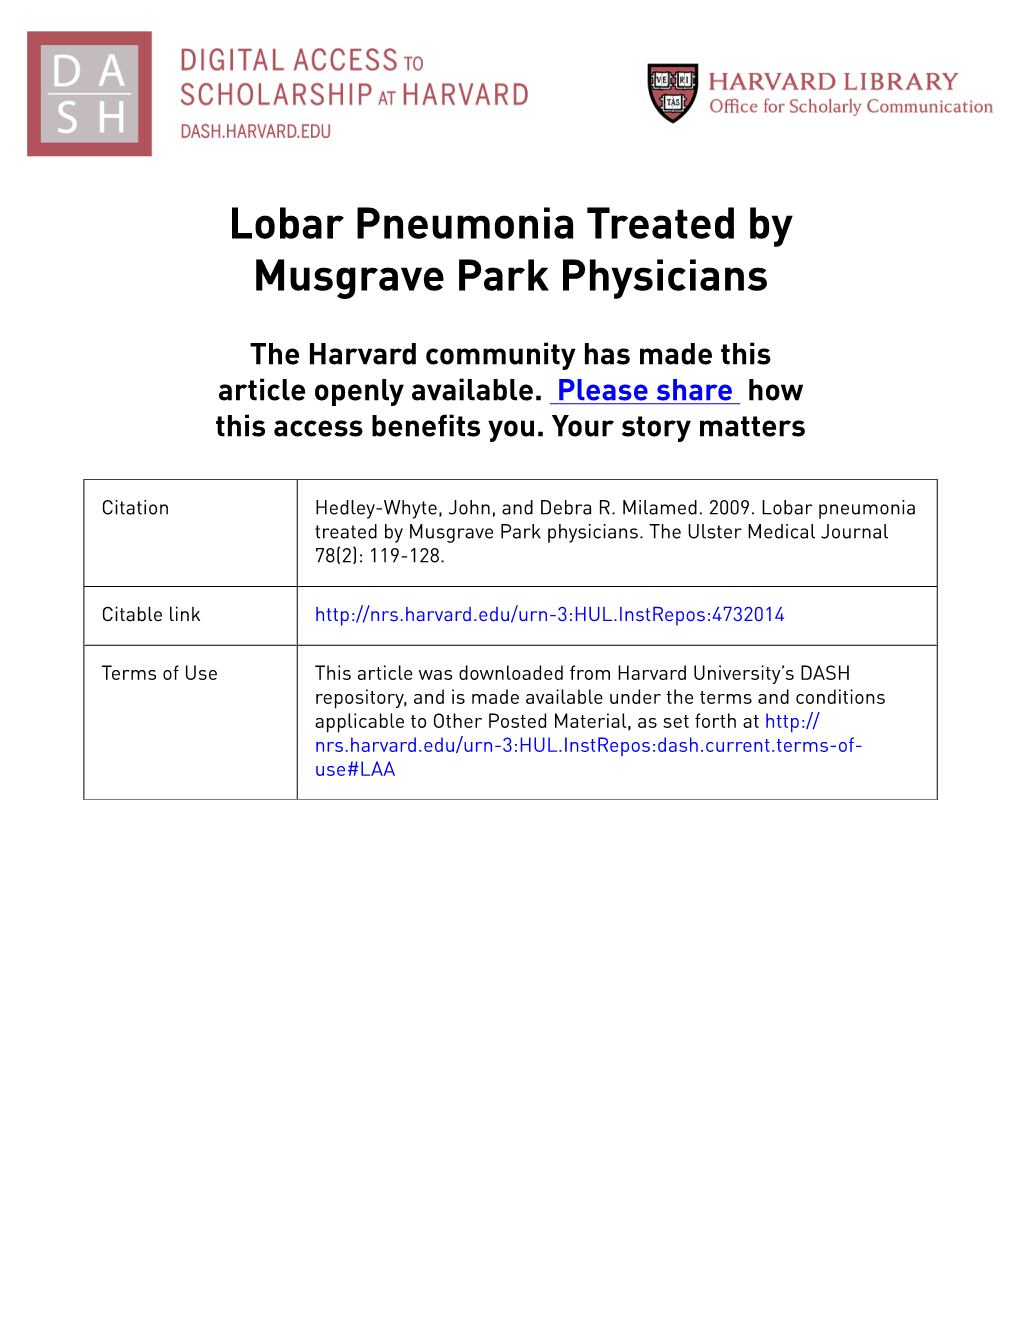 Lobar Pneumonia Treated by Musgrave Park Physicians